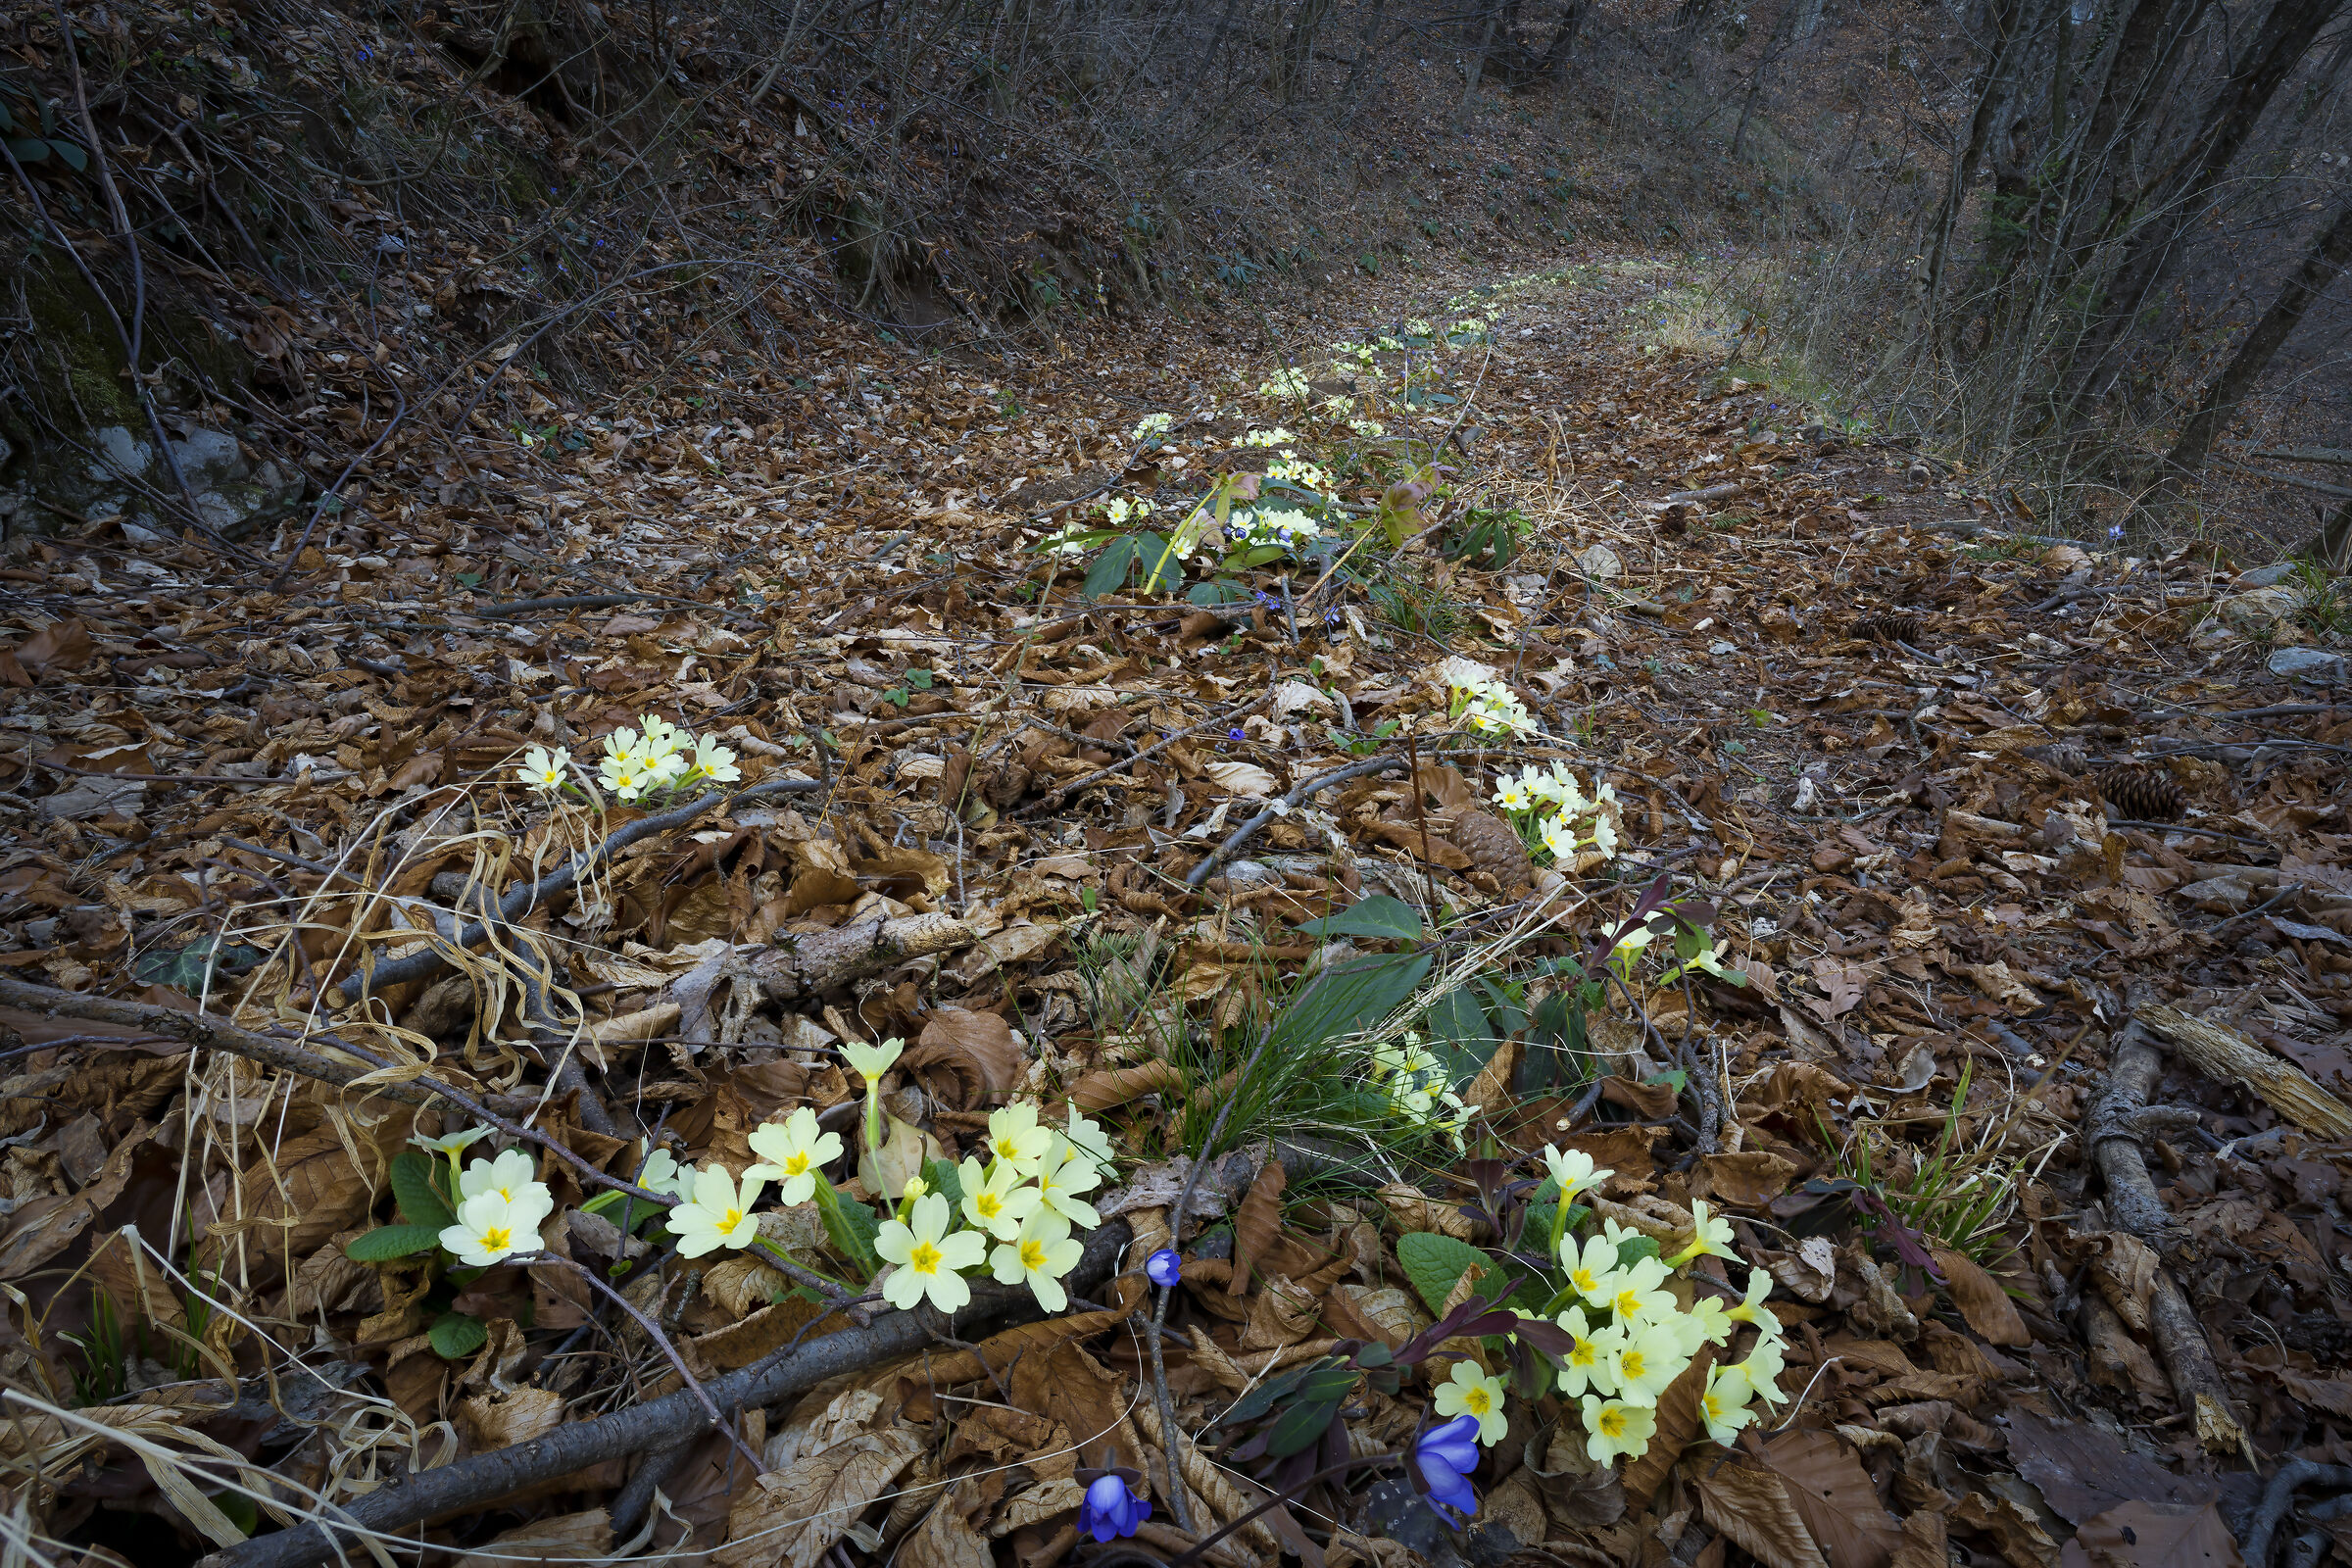 The path of the primroses...